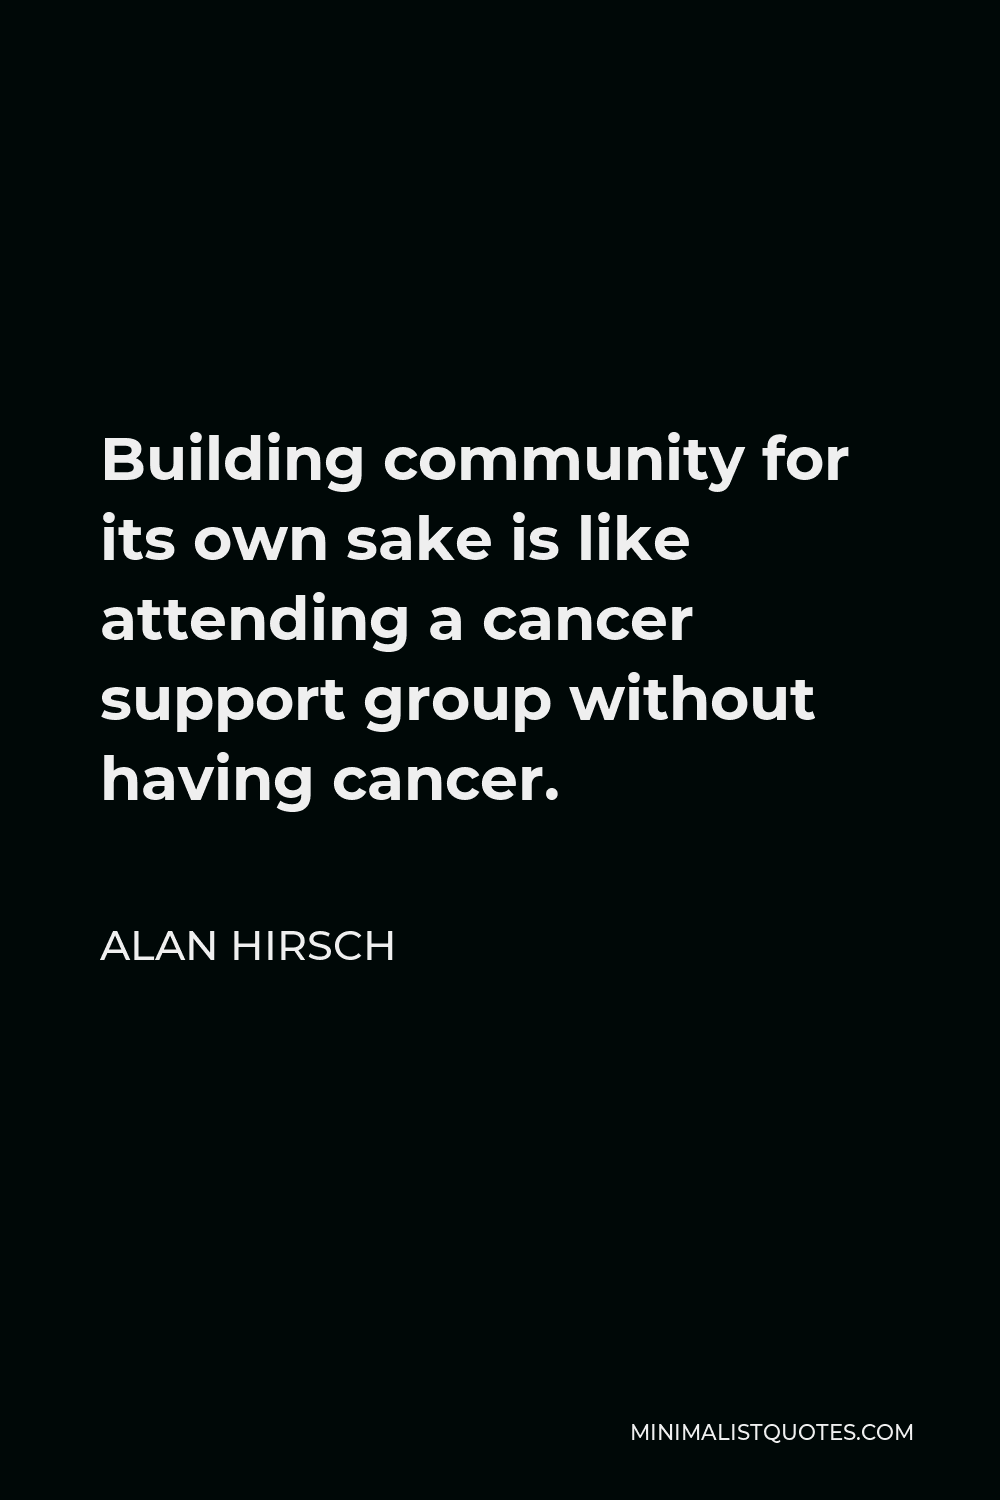 Alan Hirsch Quote - Building community for its own sake is like attending a cancer support group without having cancer.